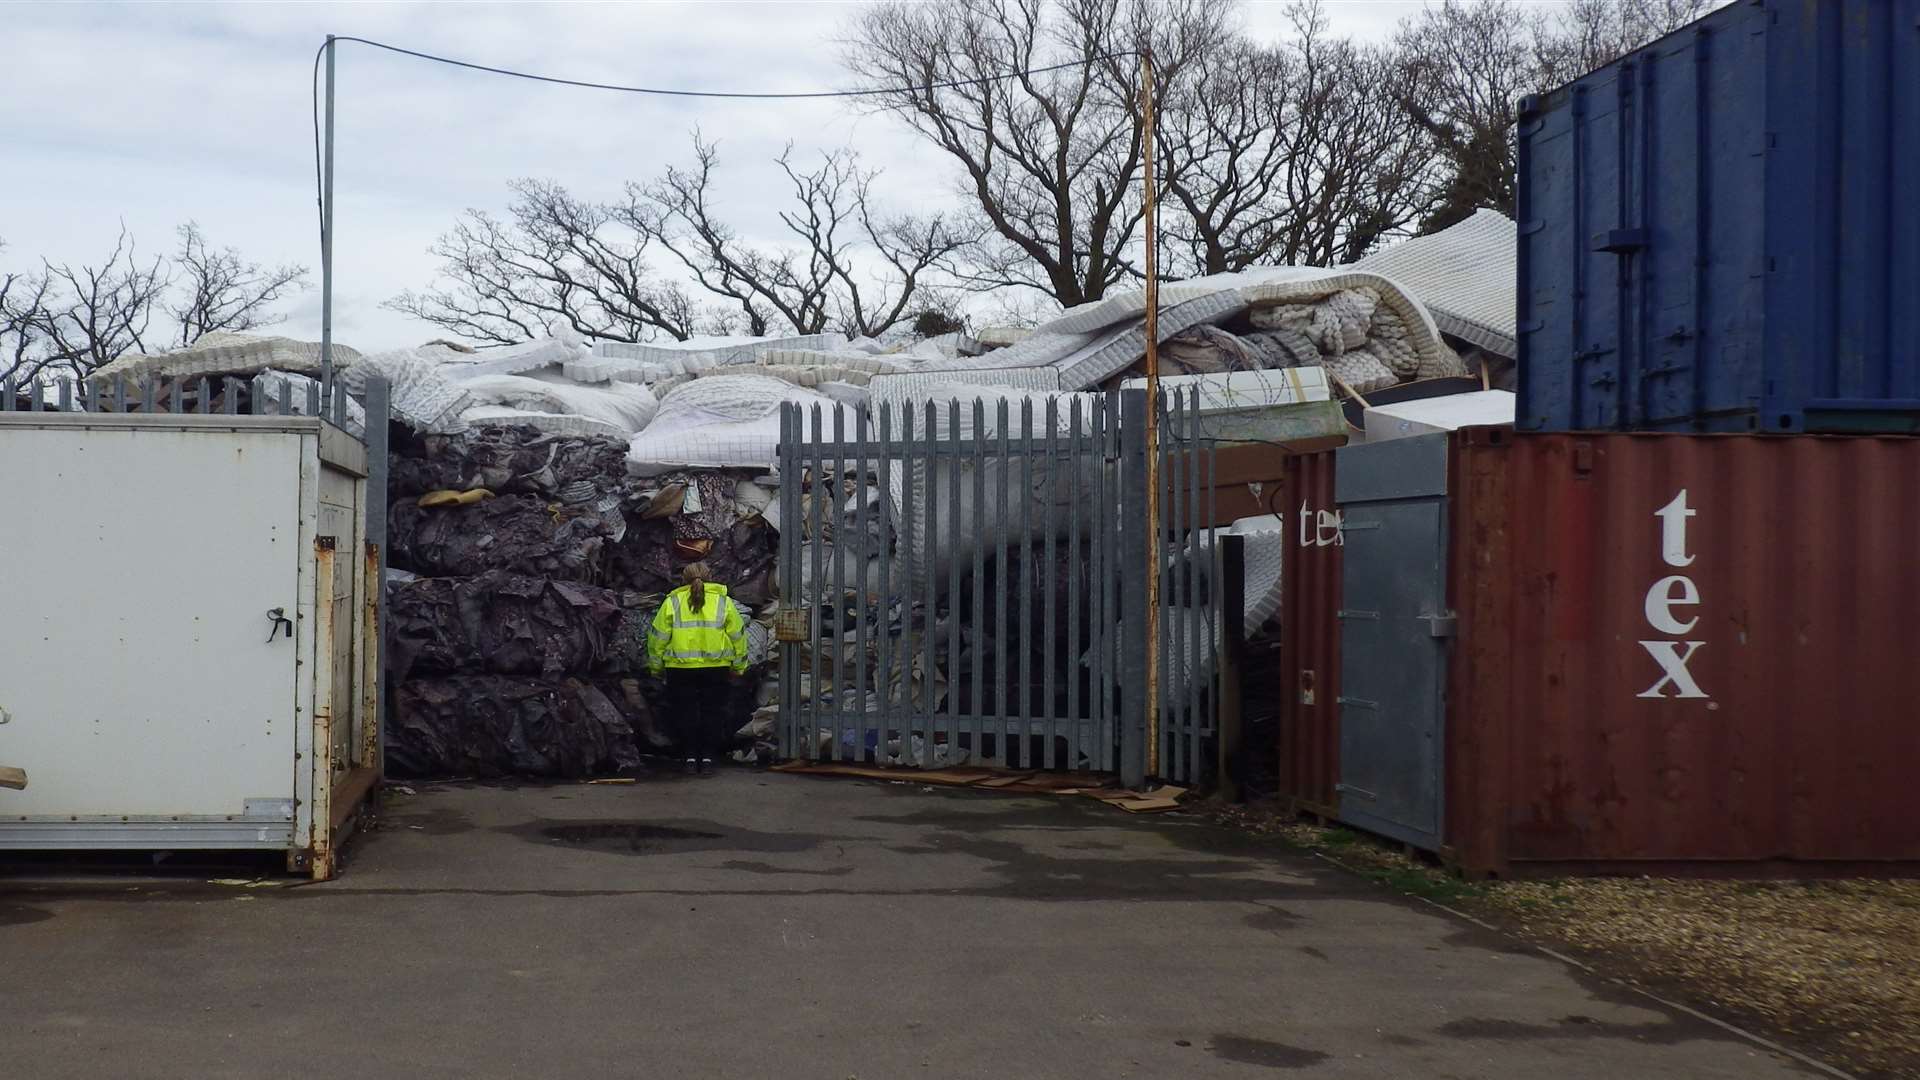 The 'mountain' of mattresses at the site. Credit: Environment Agency